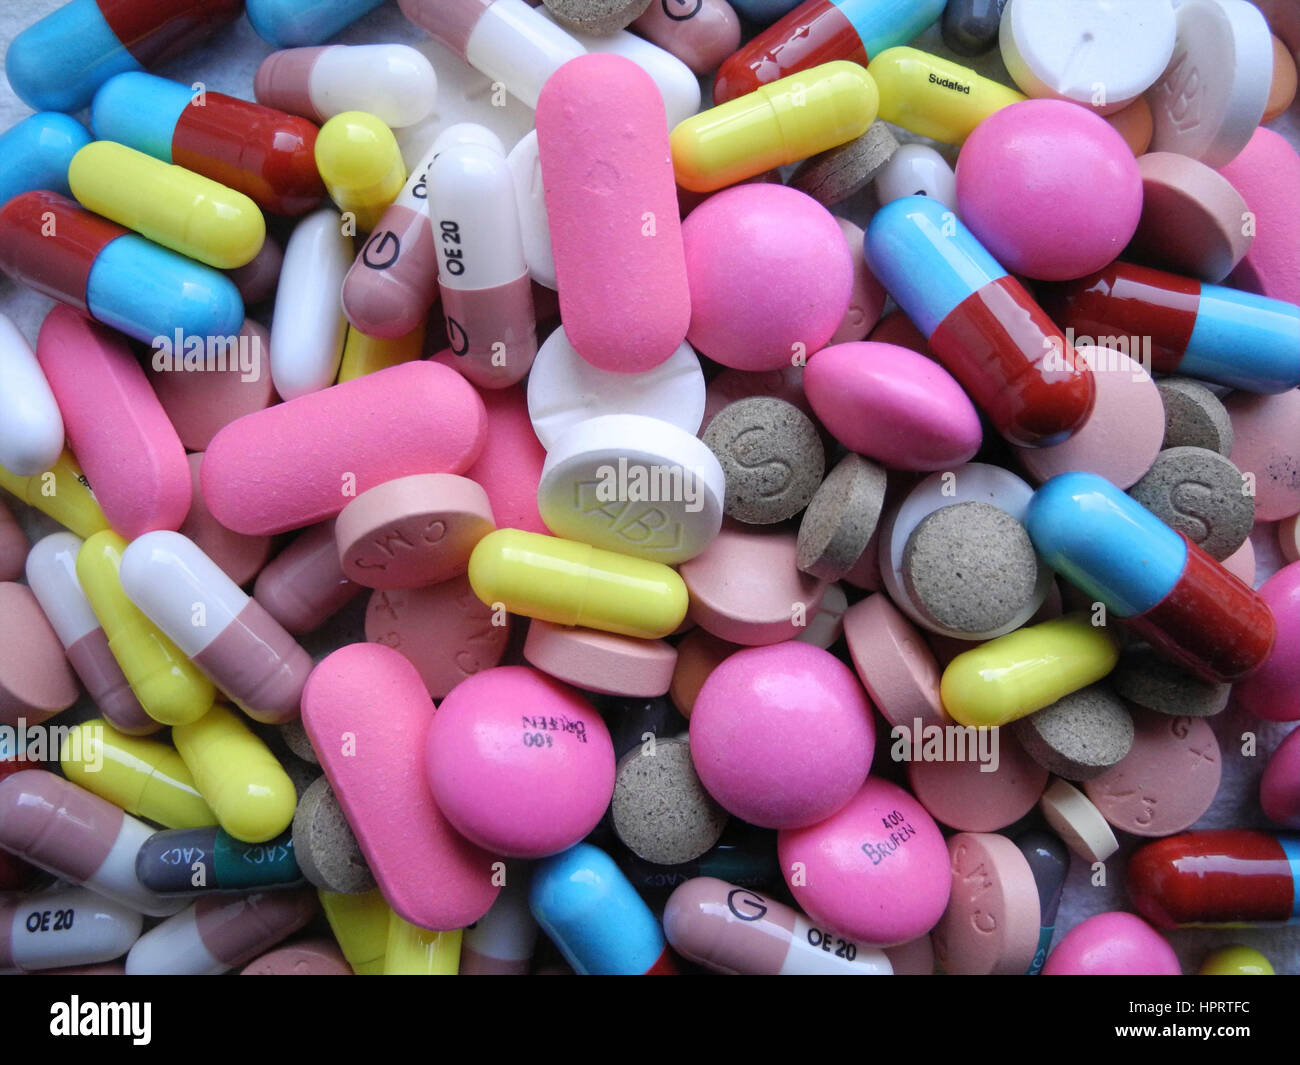 There is a massive waste of resources in the number of Prescription drugs pills tablets medicines medications which are prescribed to but unused by patients, The cost to the National Health Service (NHS) in the UK is enormous. Stock Photo